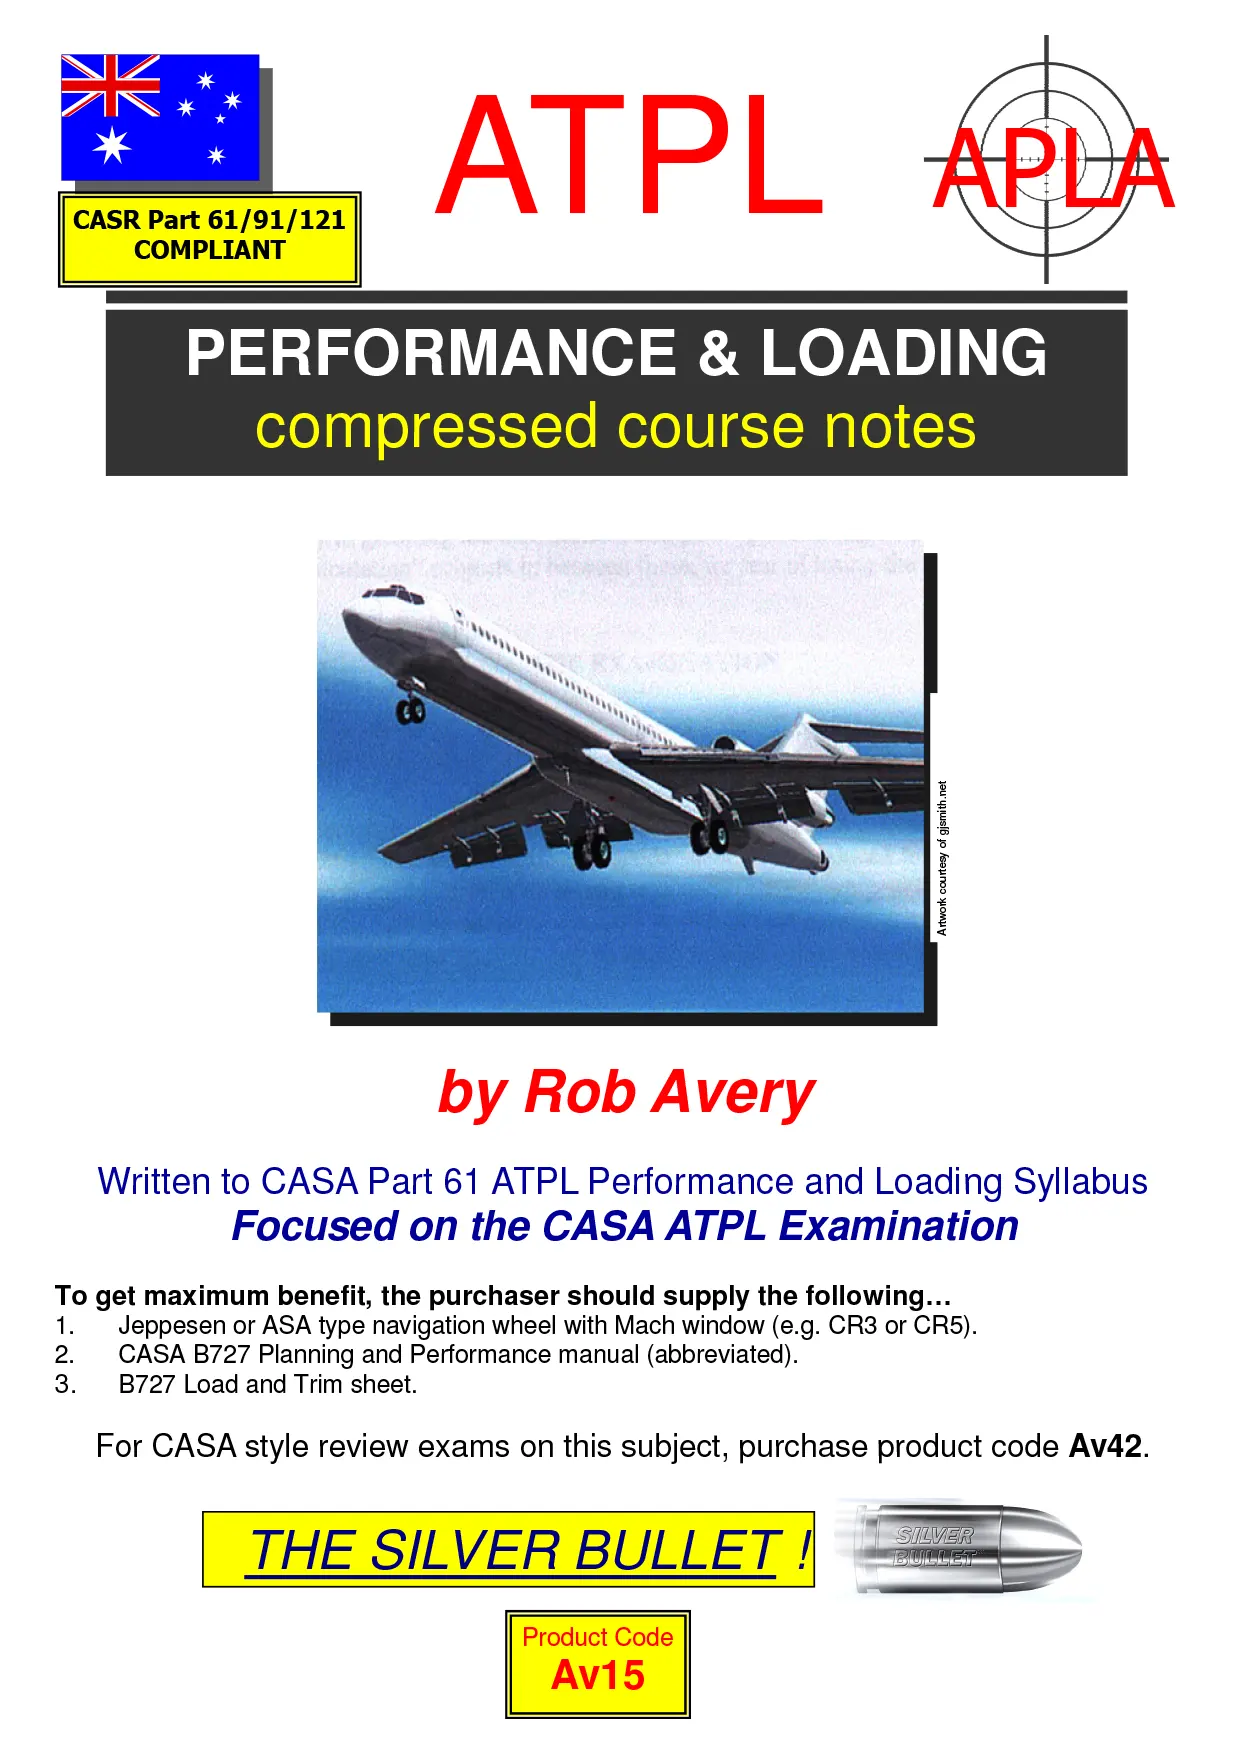 ATPL Performance & Loading Reference Textbook